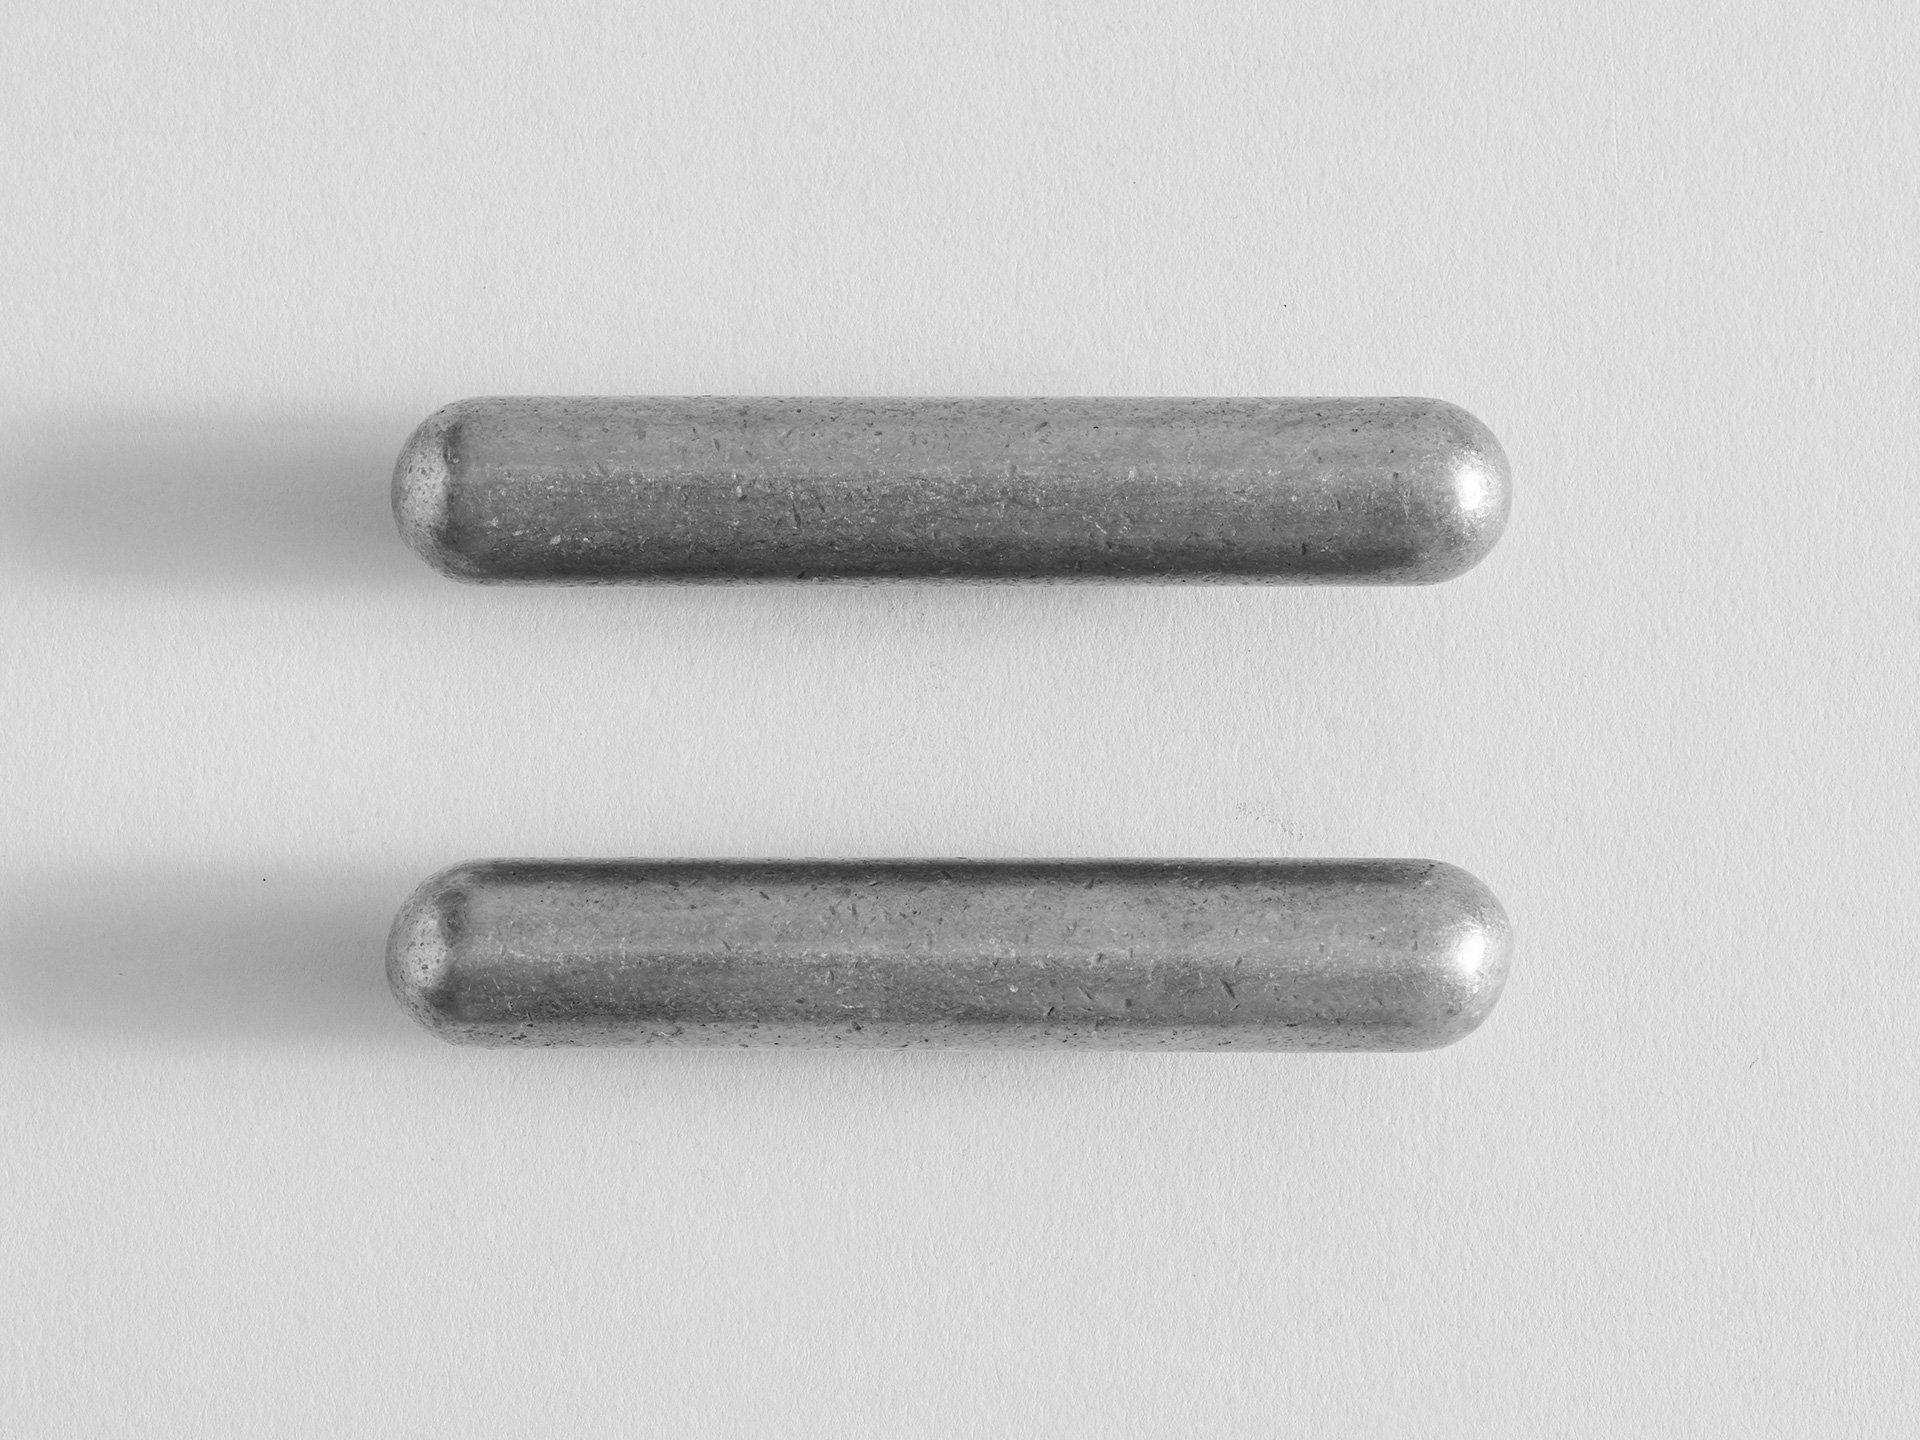 Set of 2 Polished Aluminium PSL Handles by Henry Wilson
Dimensions: W 2 x D 3 x H 9 cm 
Materials: Aluminum 
Also available in XL dimensions 20.5 x 2.6 x 1.6 cm
PSL handle (Pull, Slide, Lift) 

This versatile handle can be used for cabinetry,